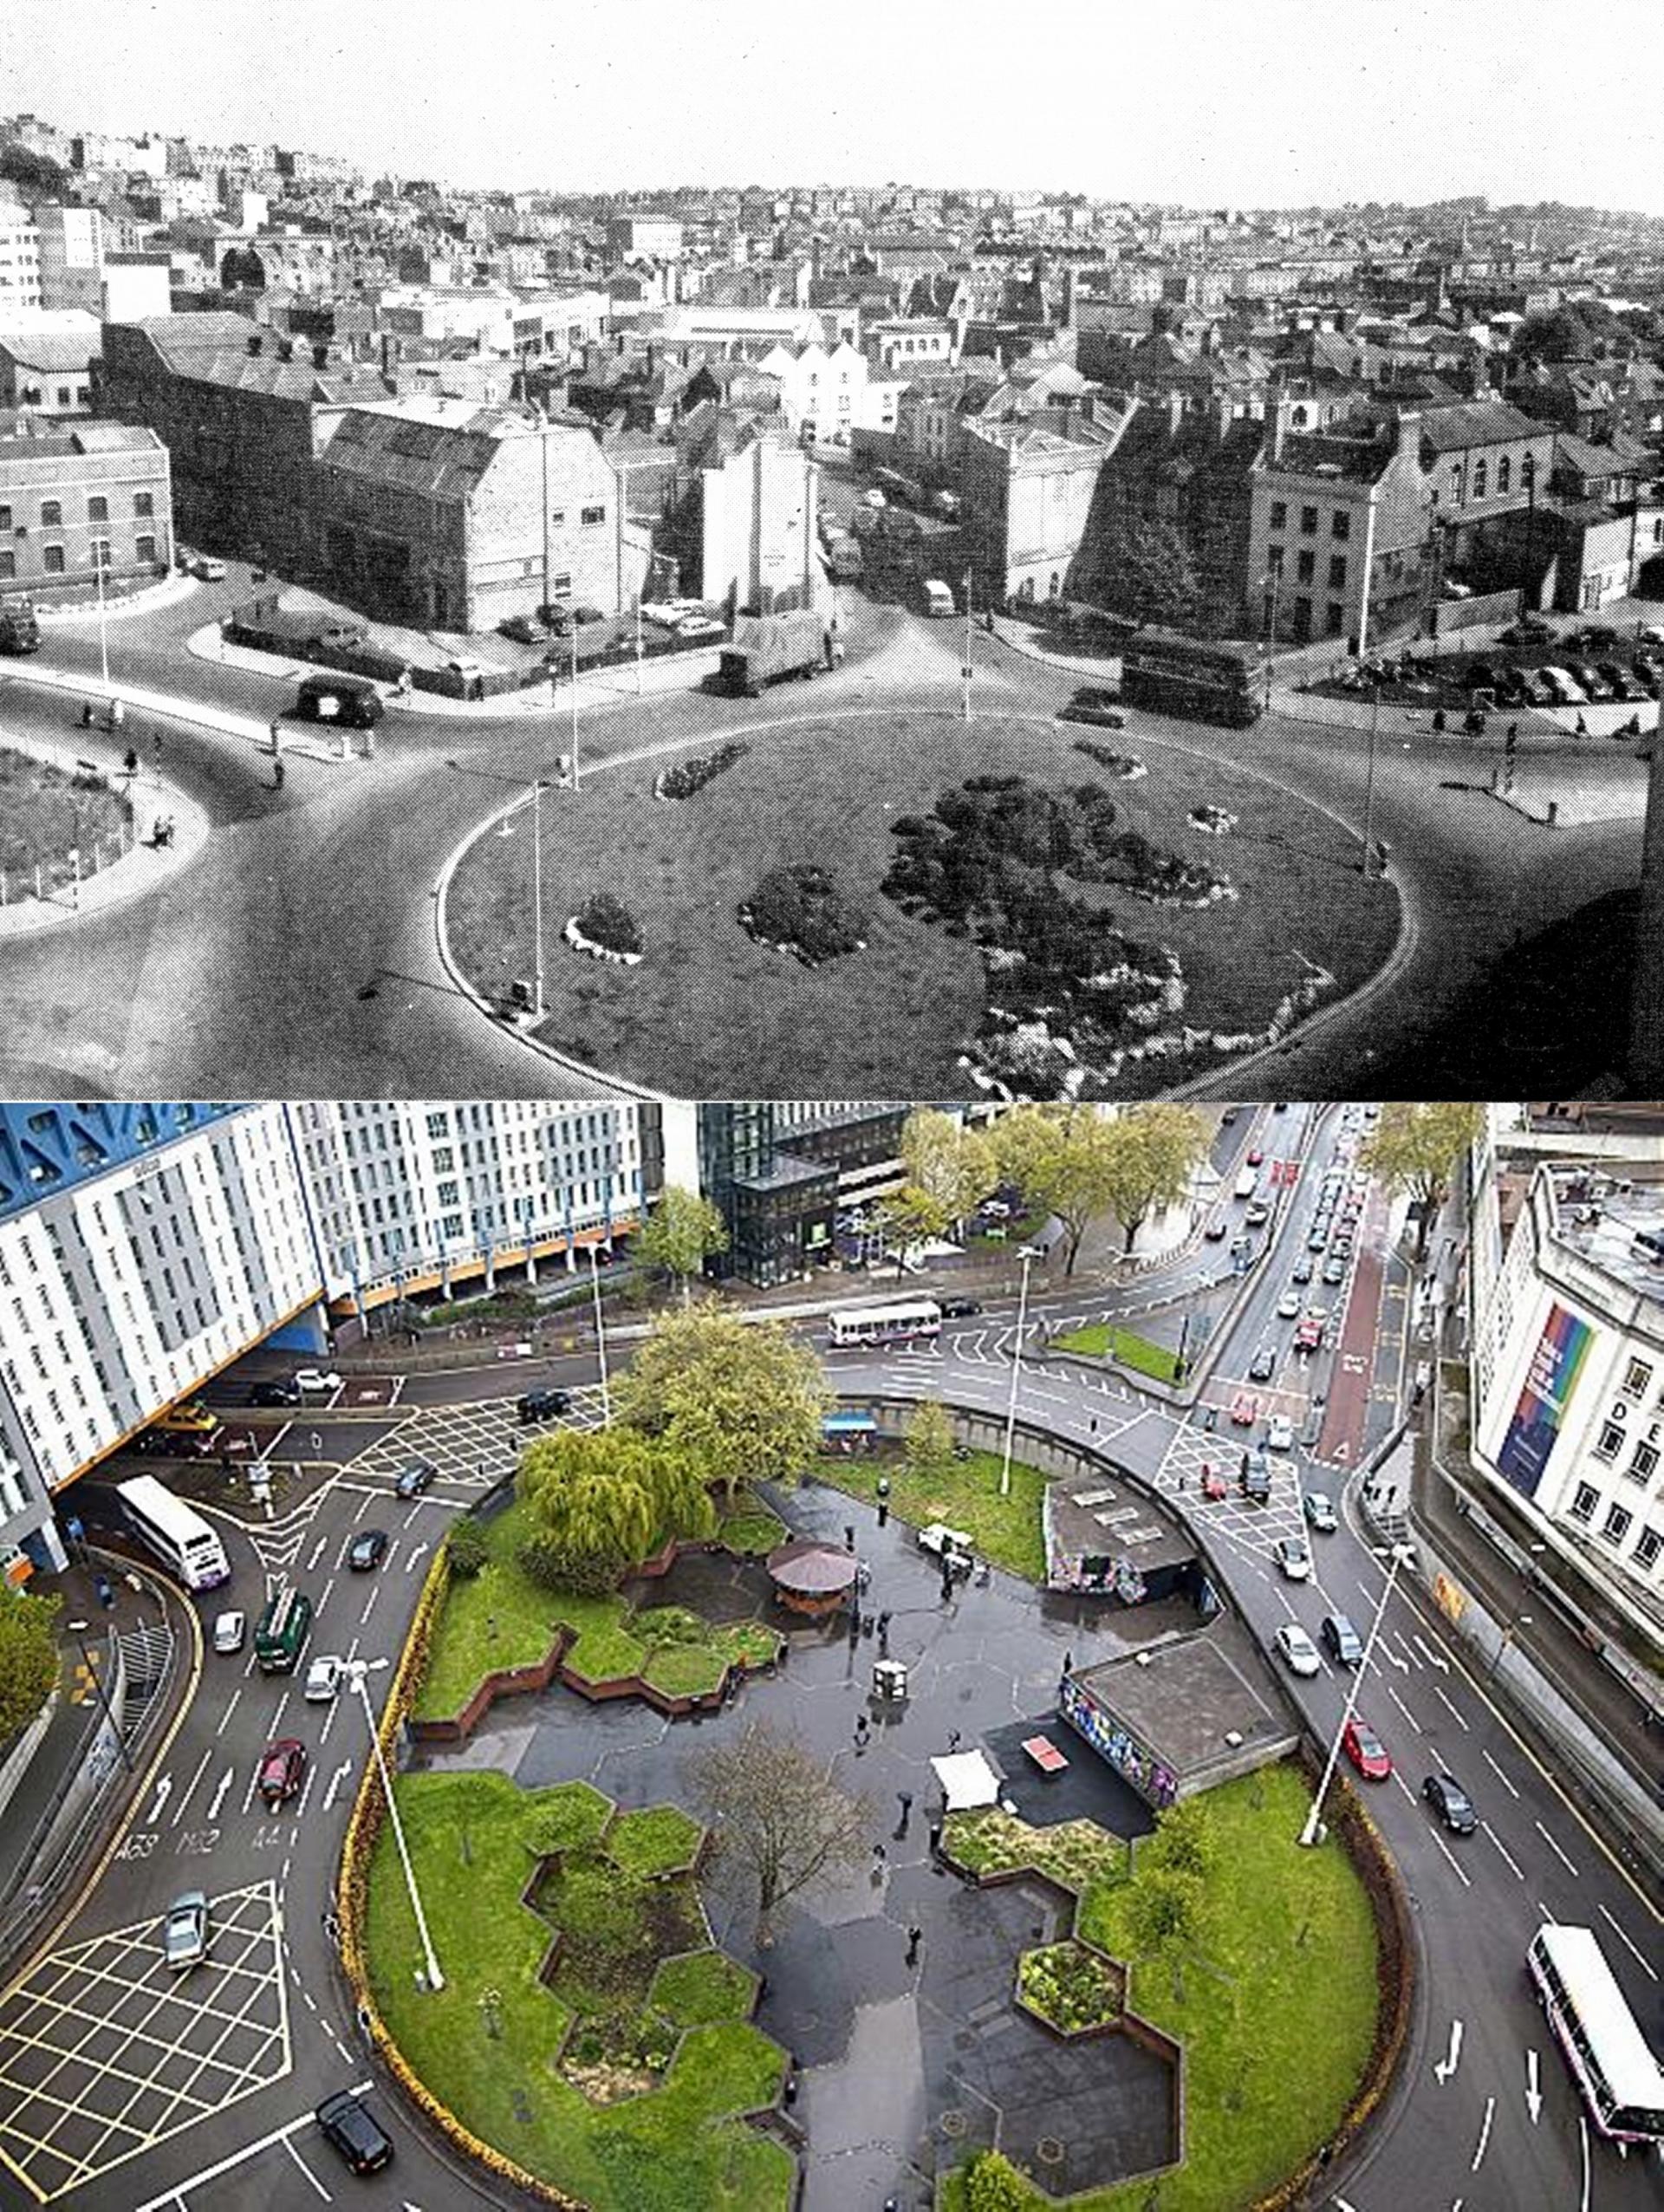 The Bearpit - then and now © Paul Townsend, Flickr (CCL)